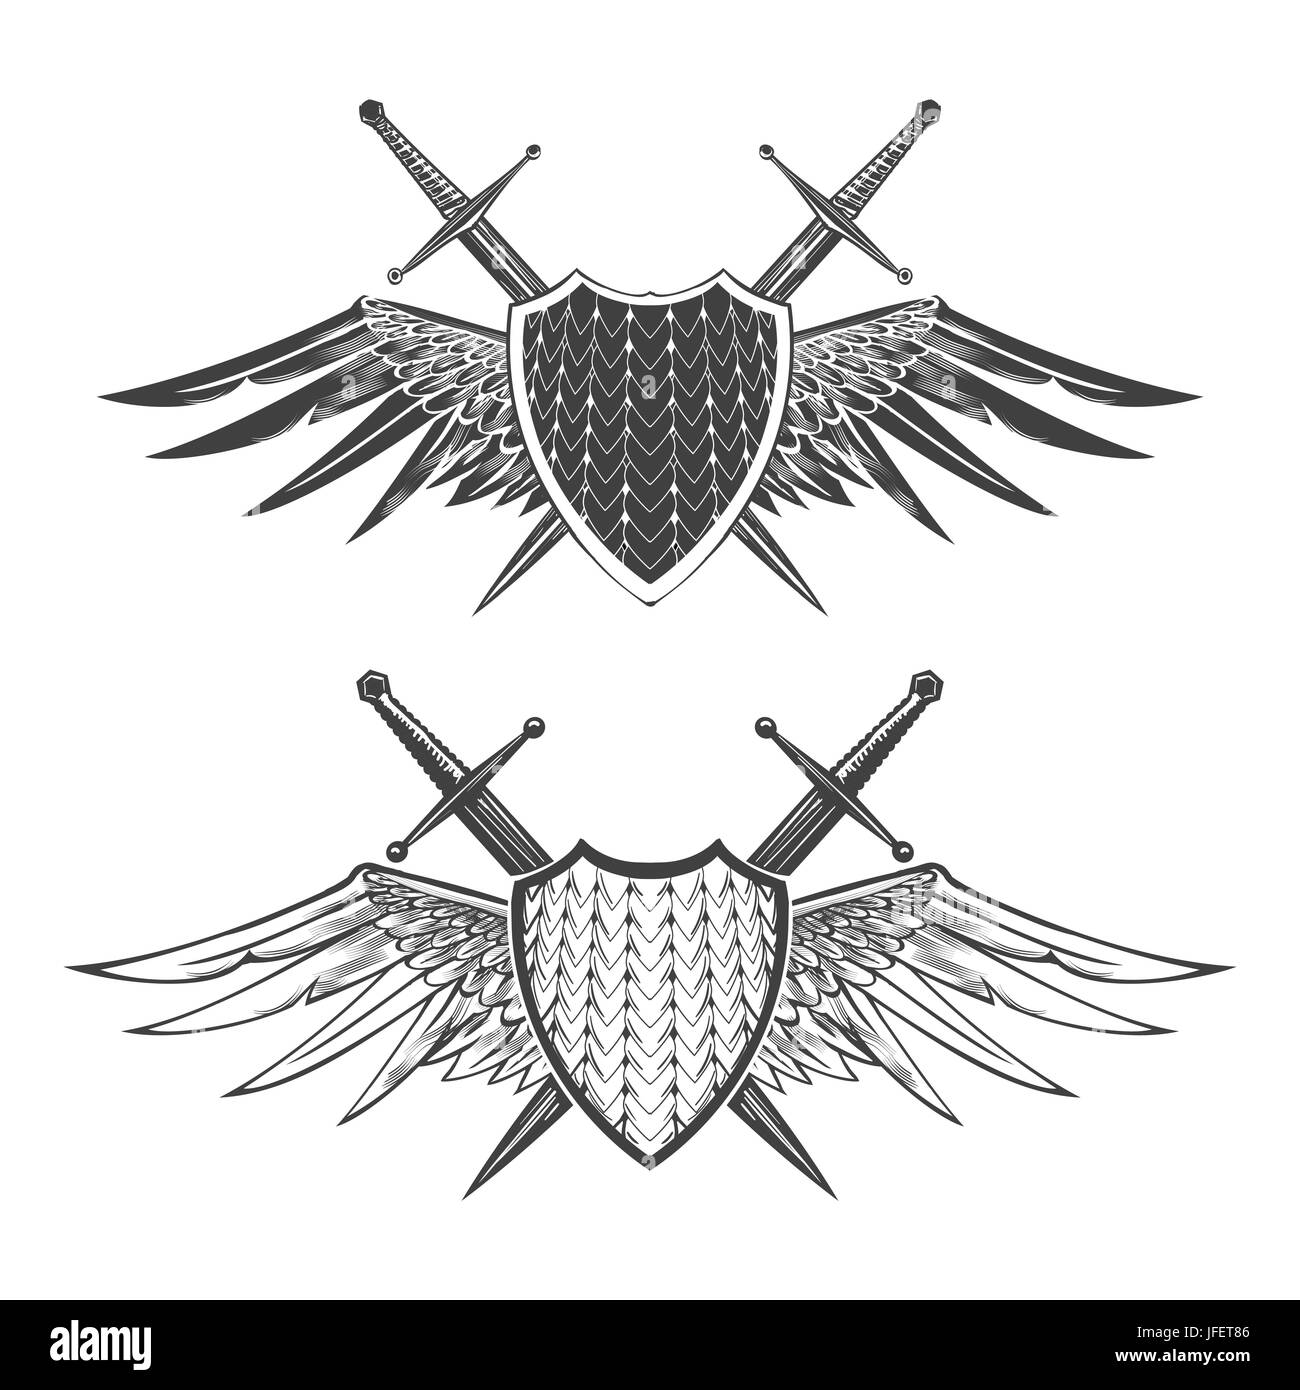 Two shields with swords and wings. Knight or heraldic design elements. Vector illustration isolated on white. Stock Vector